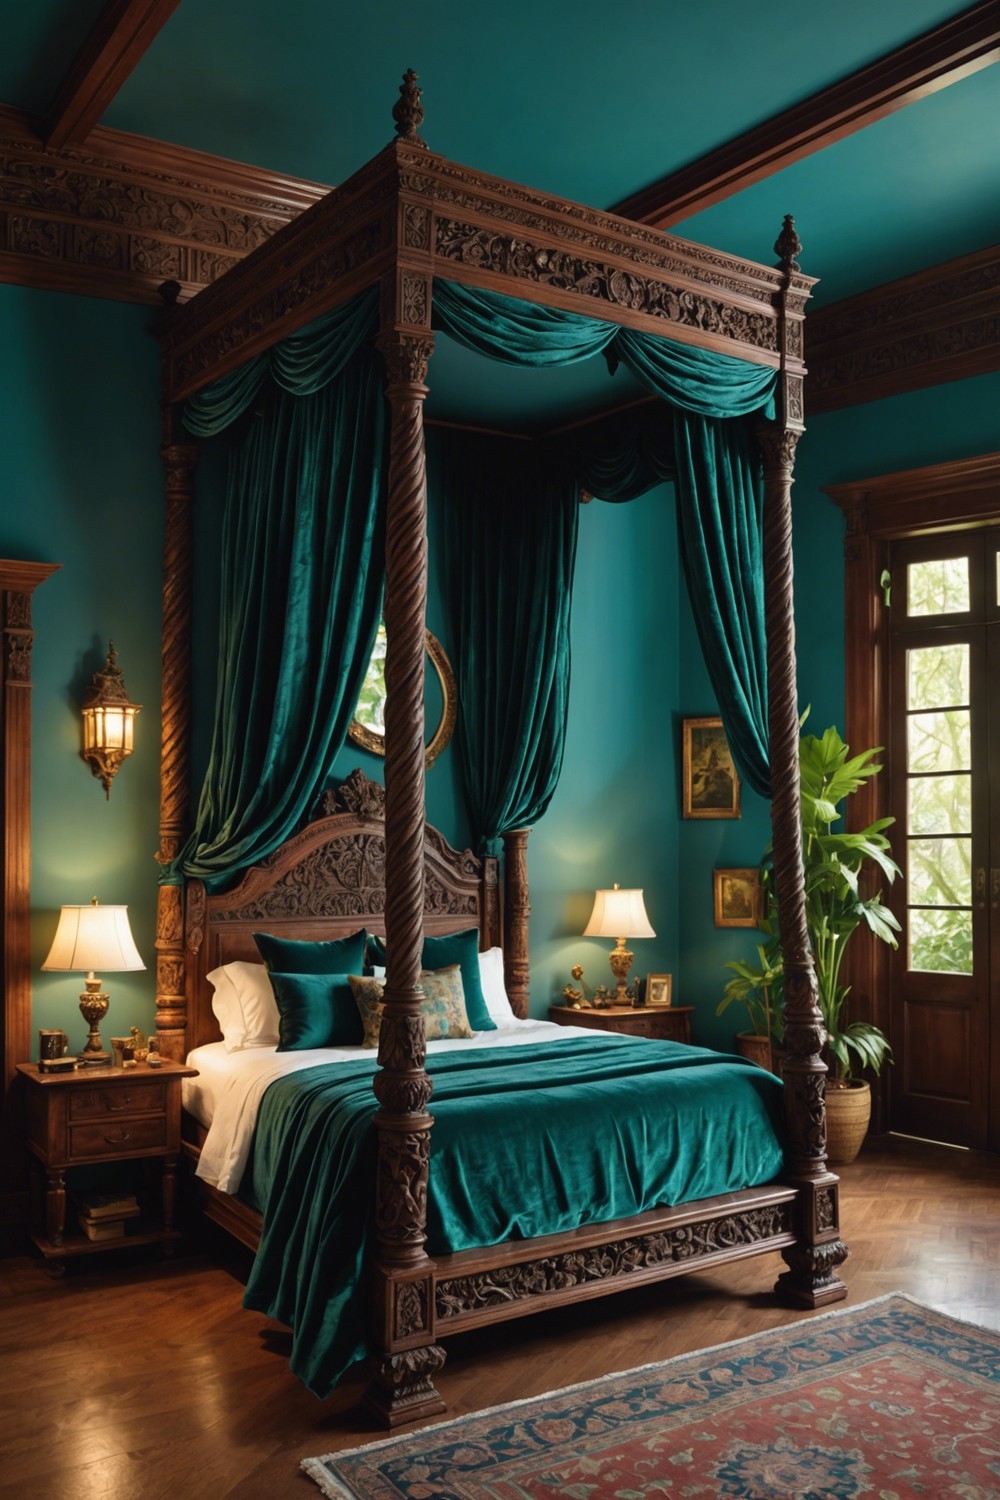 Moody Romance: Teal with Rich Wood Tones